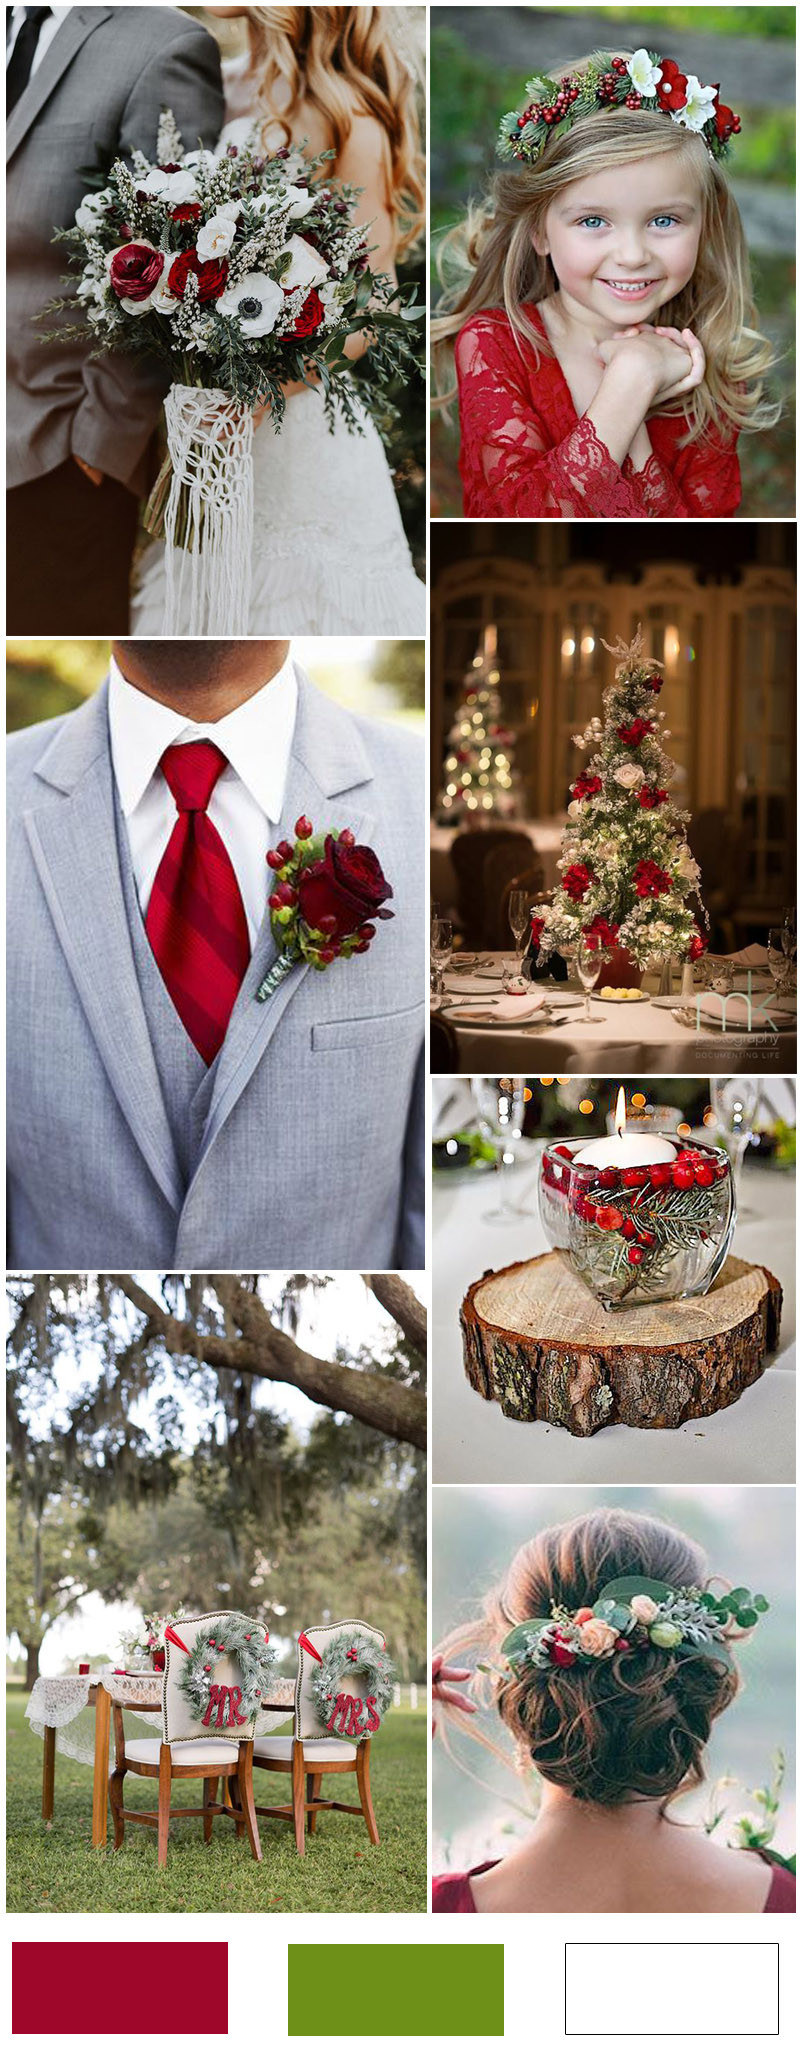 Red Wedding Theme Ideas
 16 Christmas Wedding Ideas You Can’t Miss